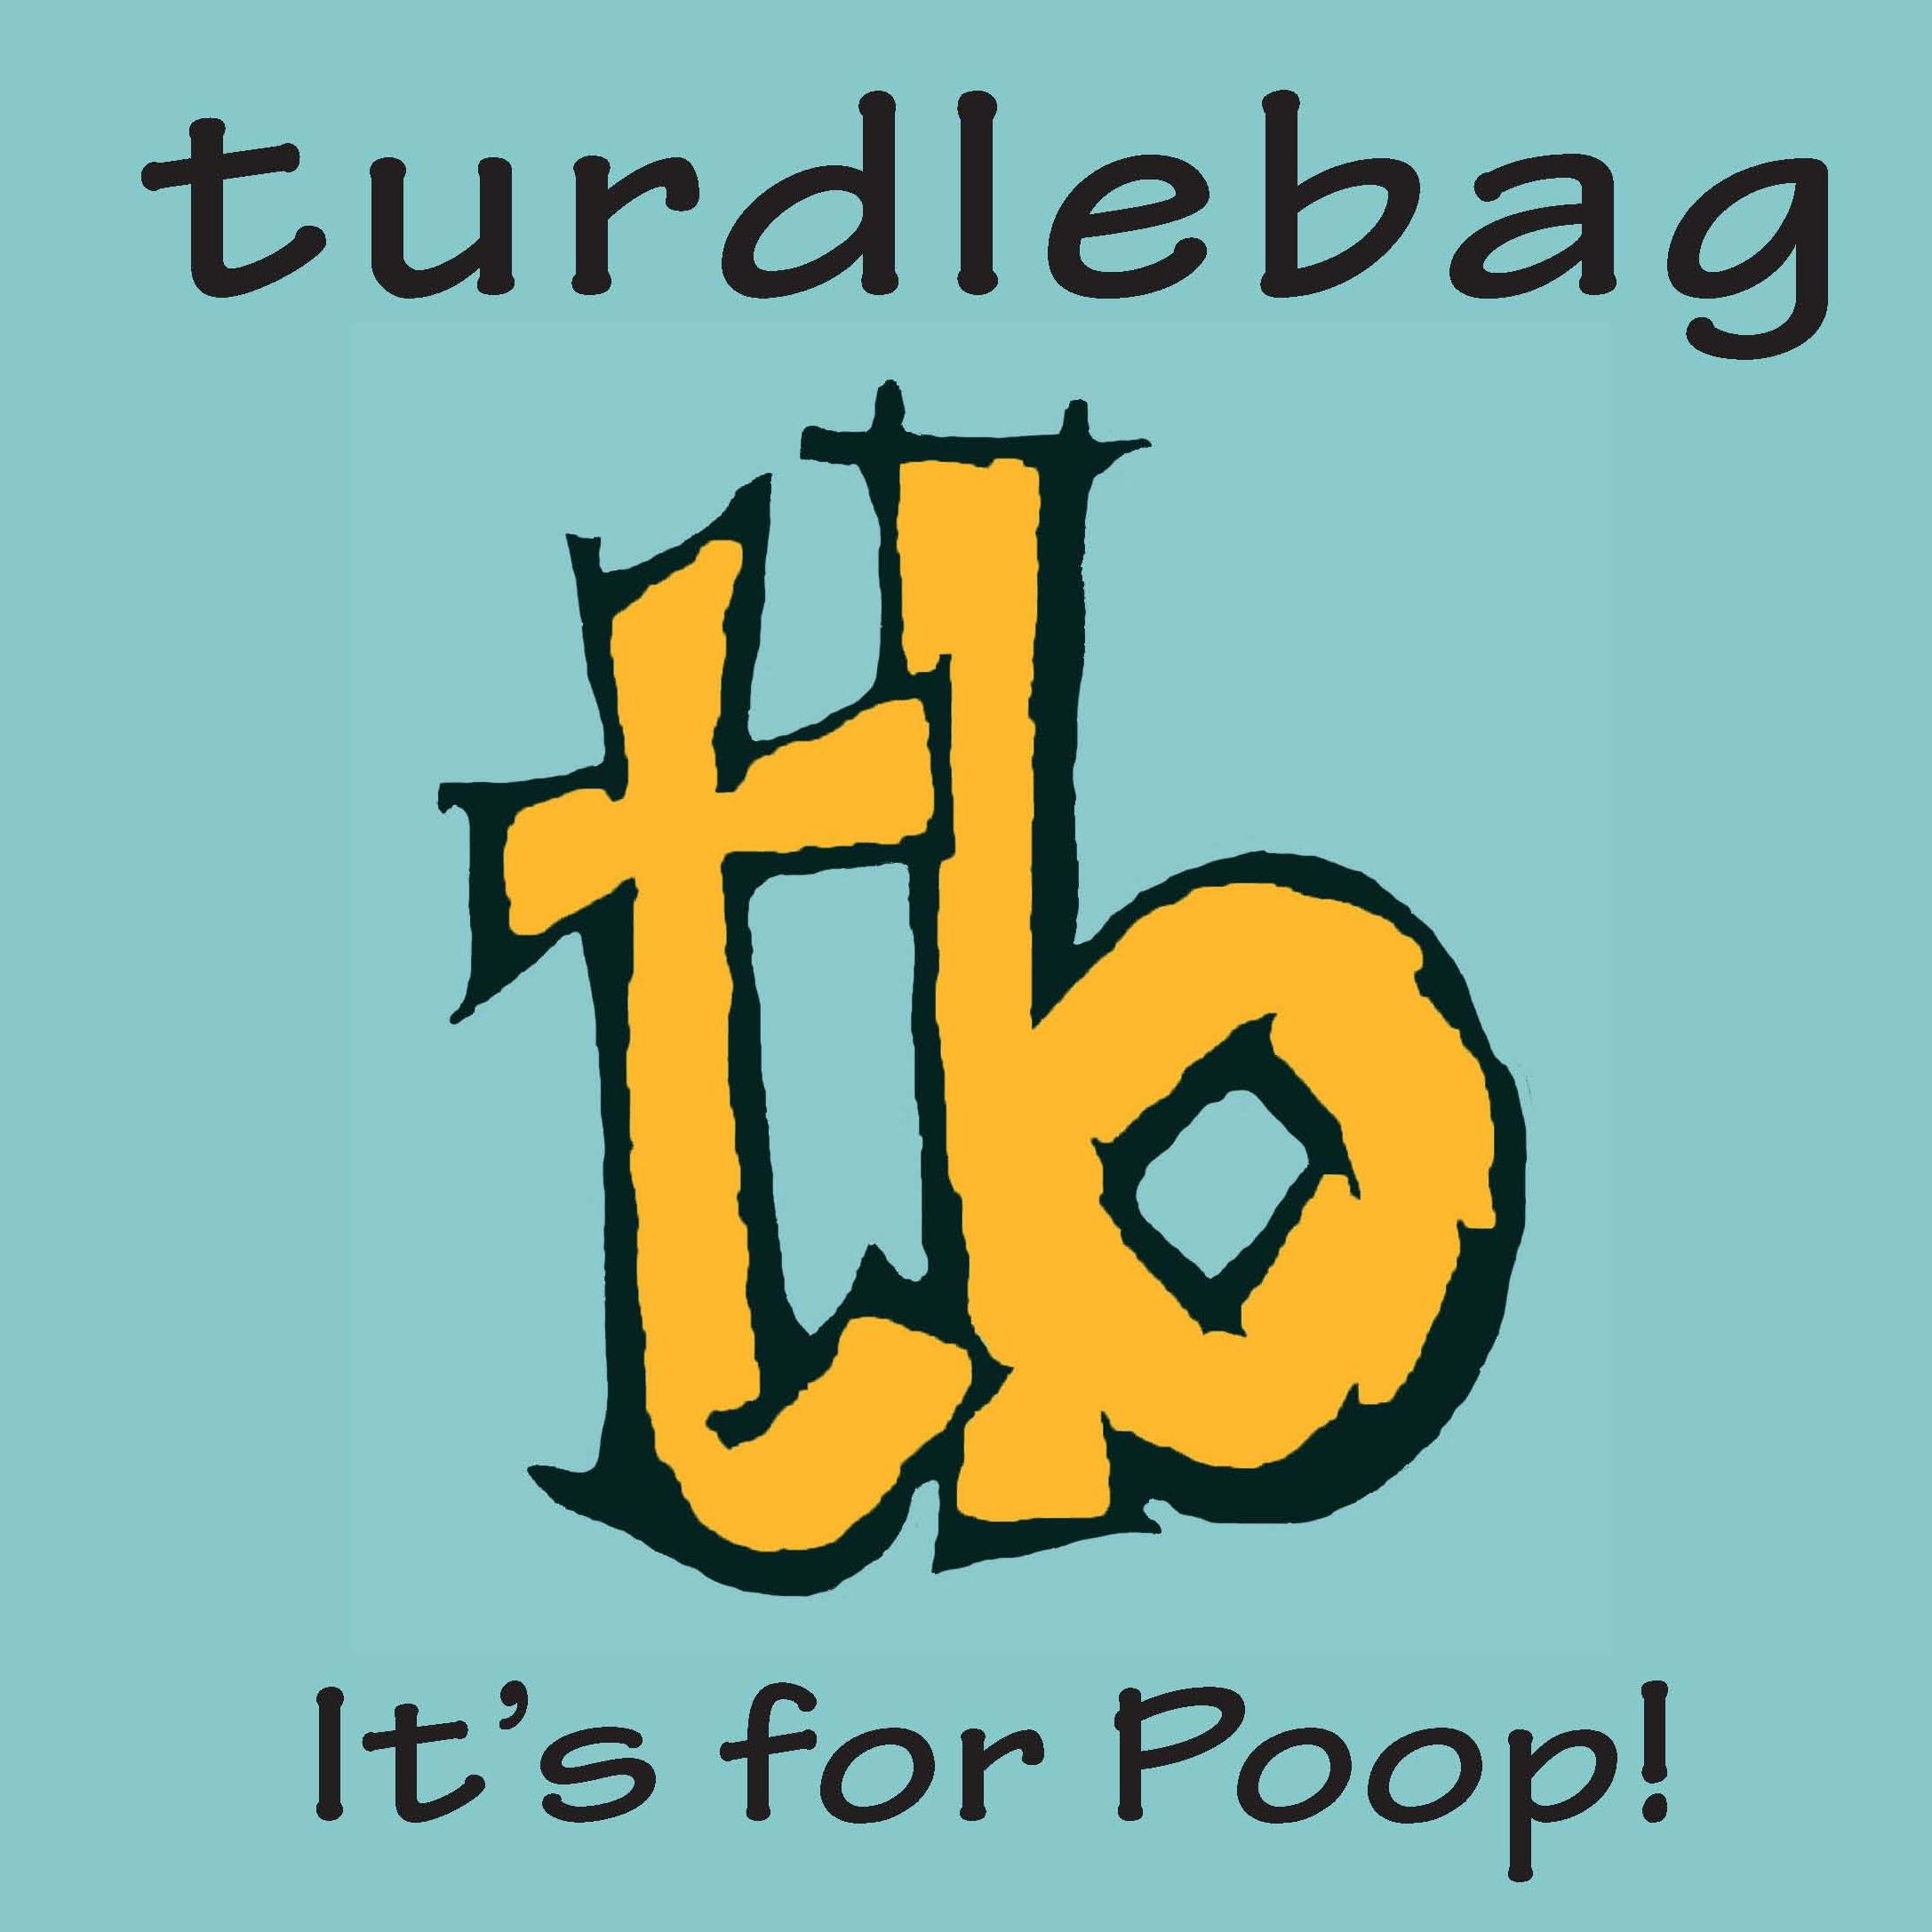 It's for poop! 
Turdlebag is the tasteful solution for dealing with that stinky bag of dog poo.